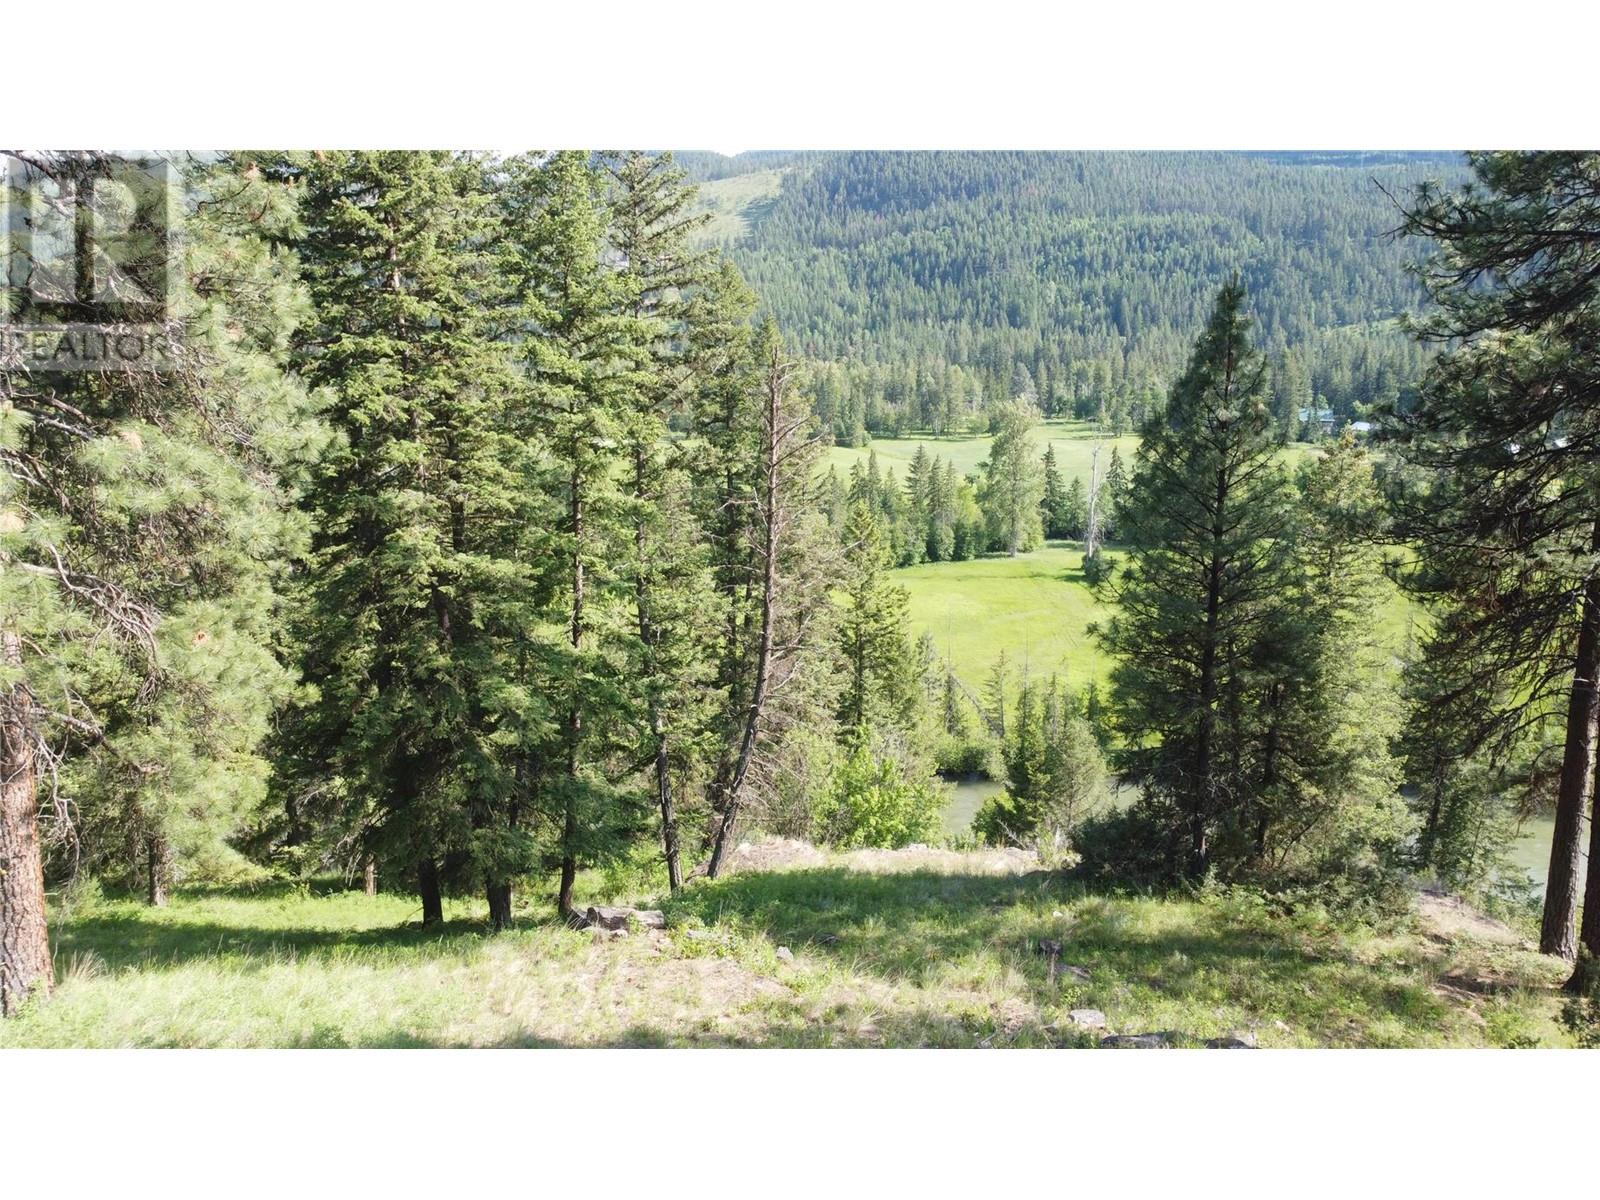 40 Acres Shuswap River Drive, Lumby Valley, Lumby 